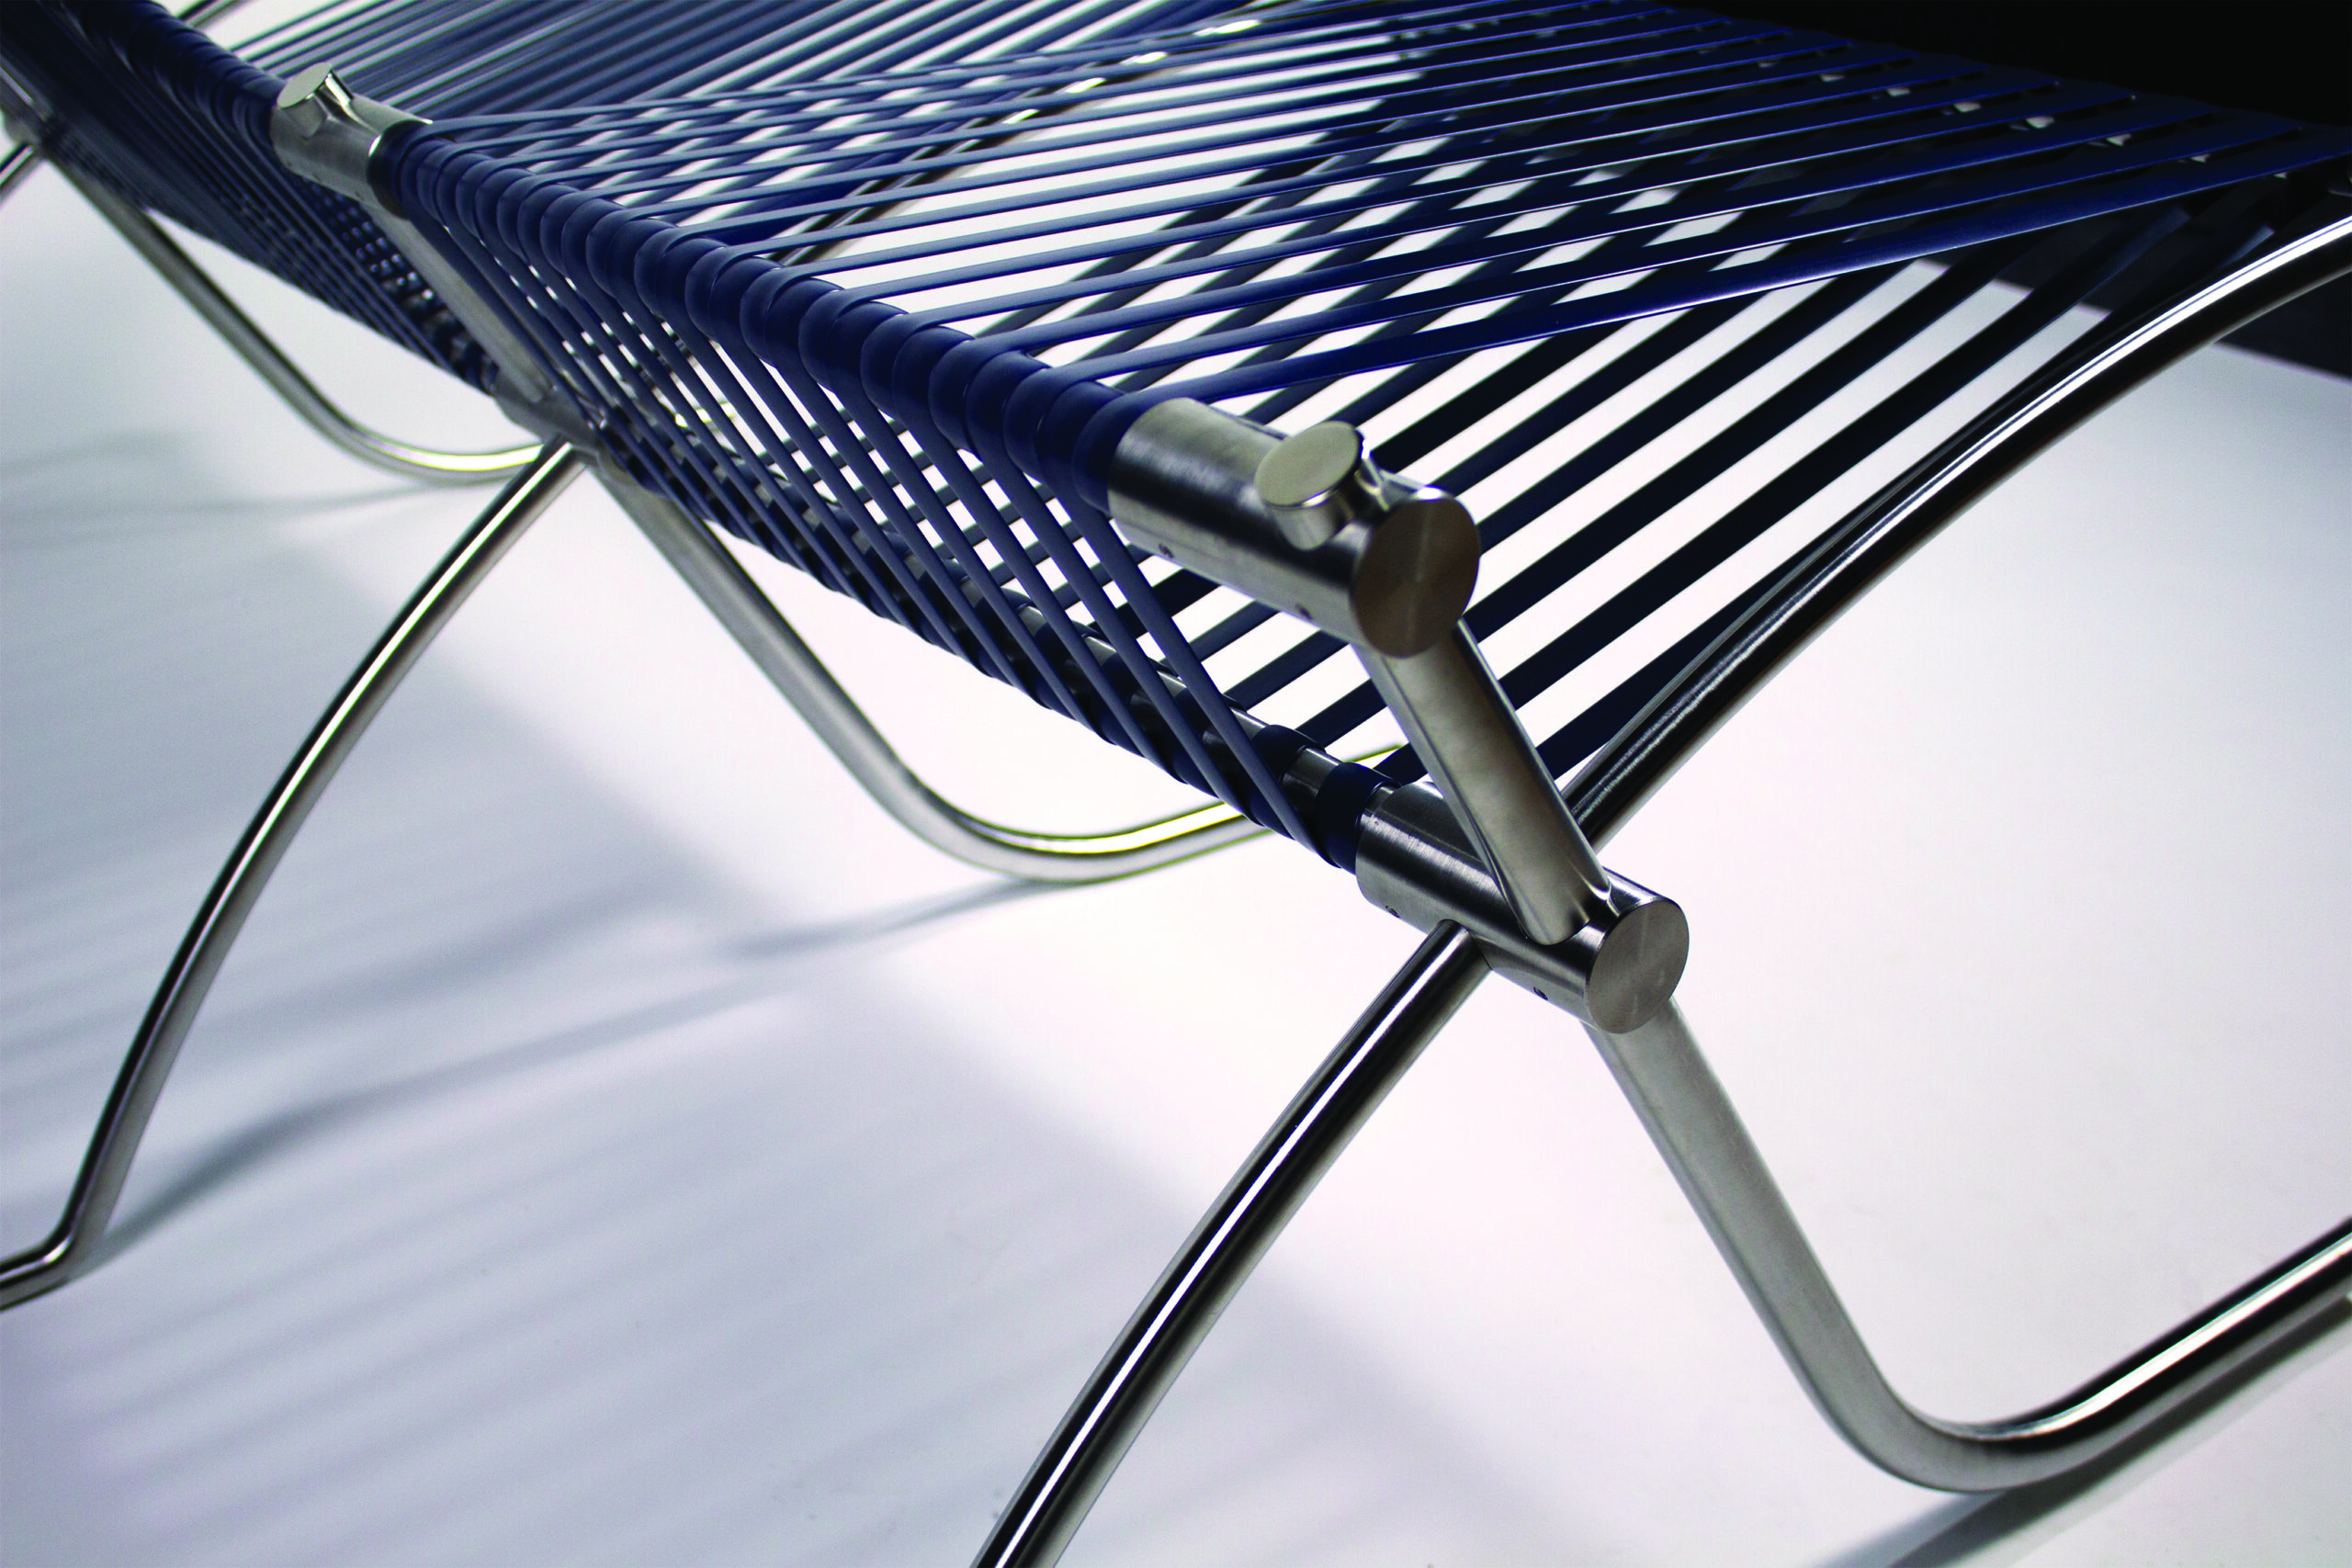 a detail photograph of a metal frame of a bench with slats running across it.